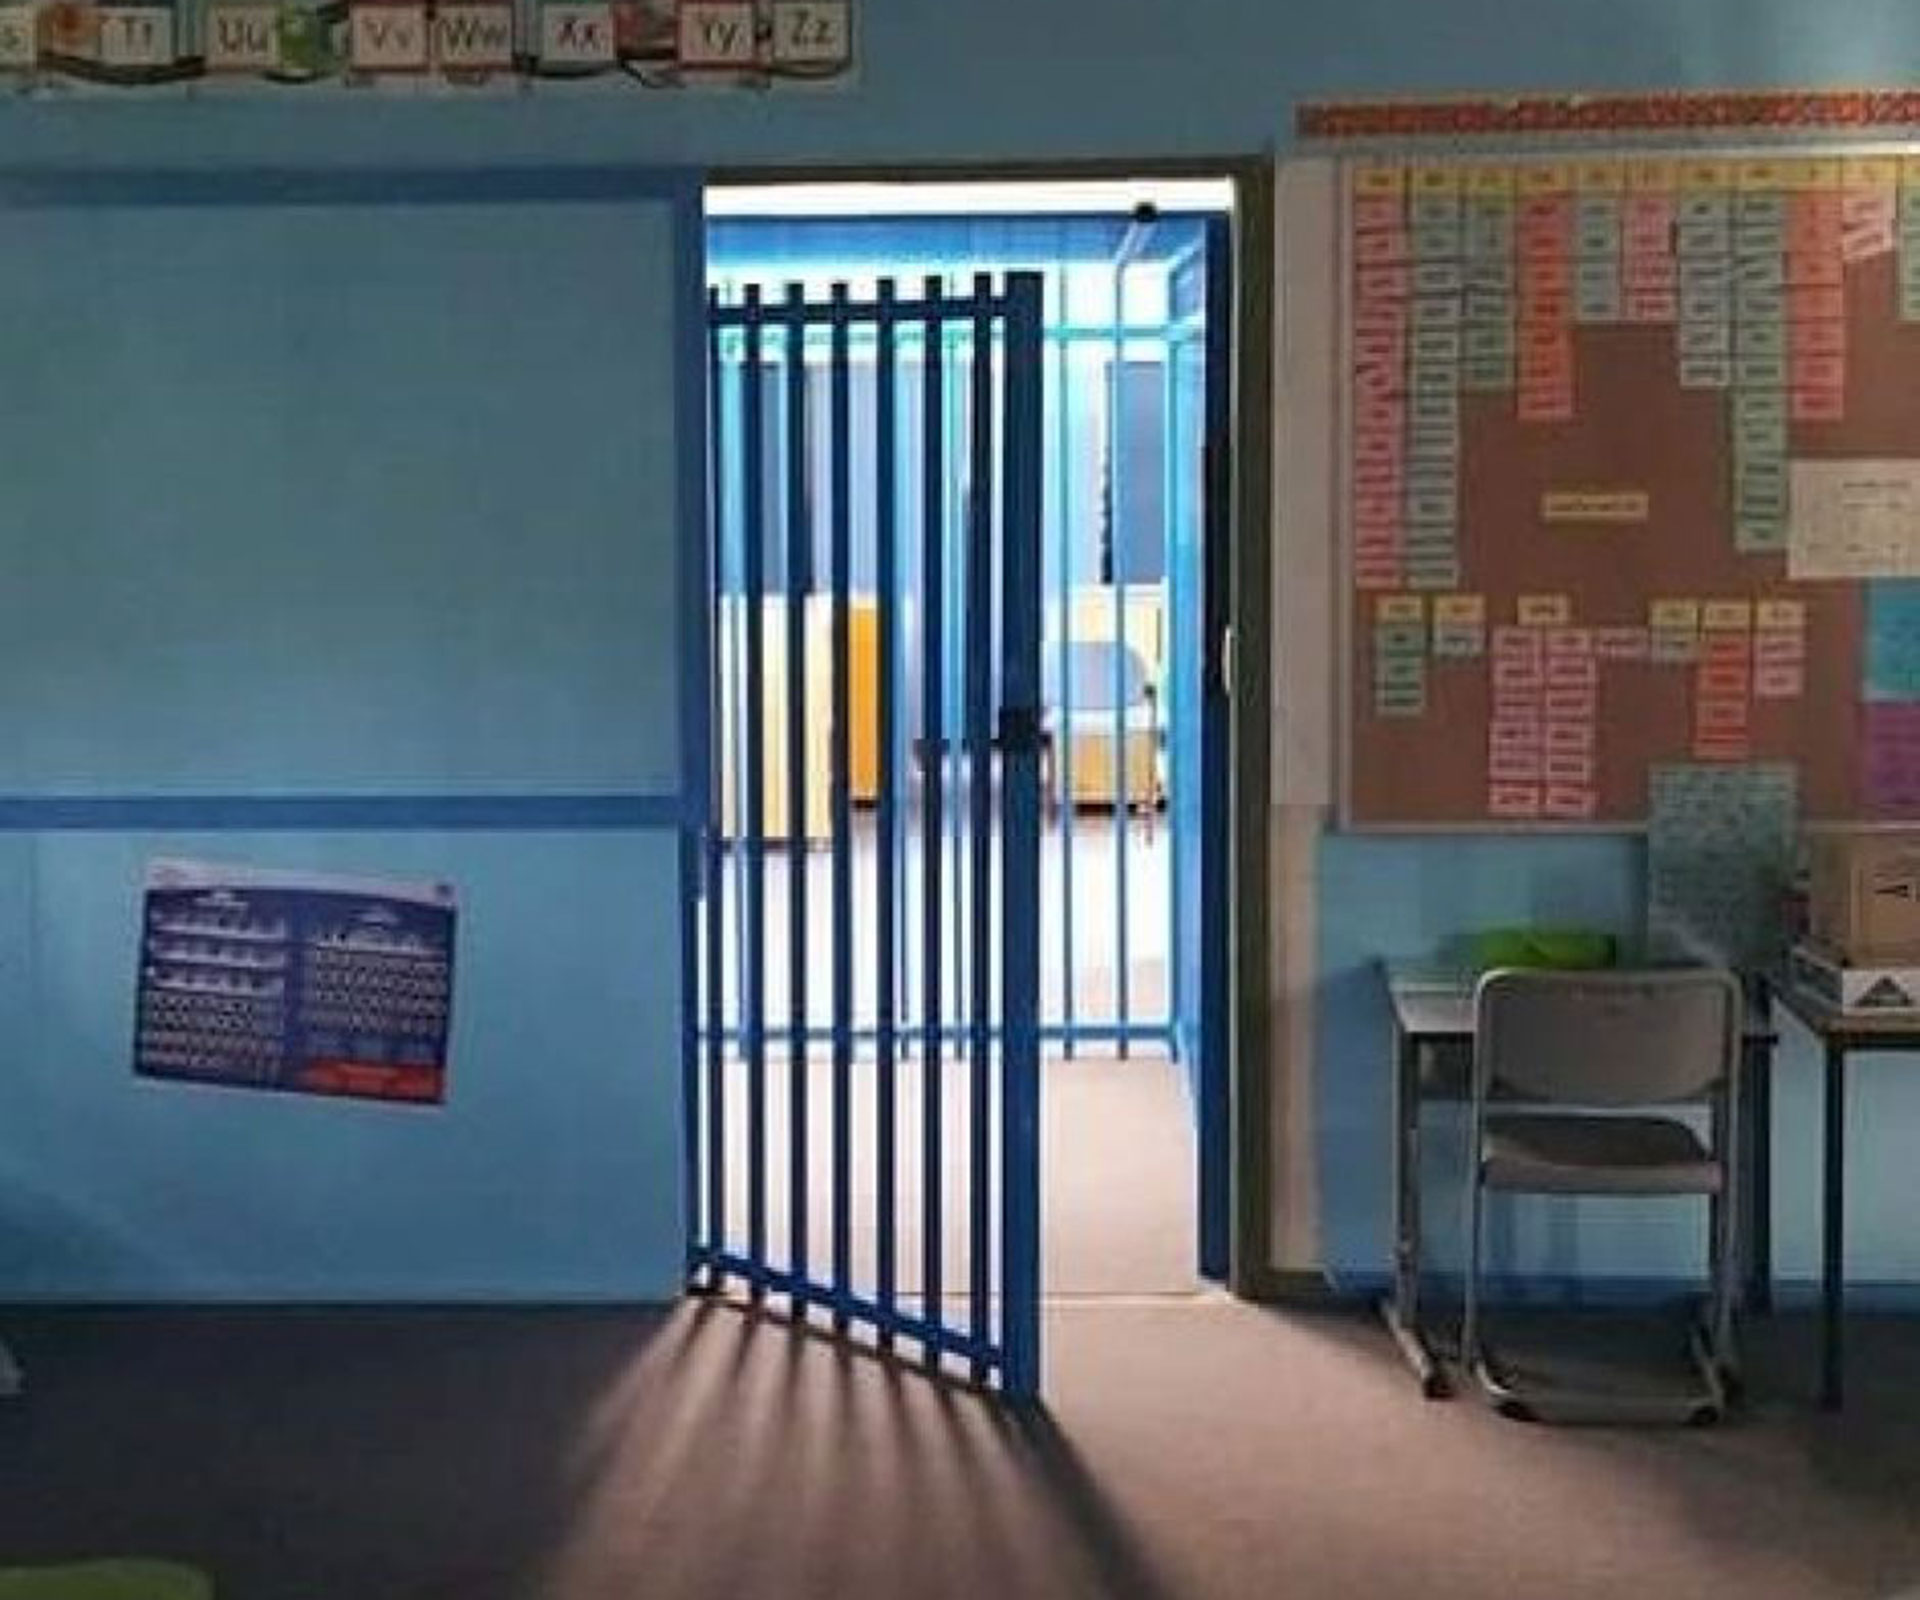 Staff ‘reprimanded’ over autism cage scandal